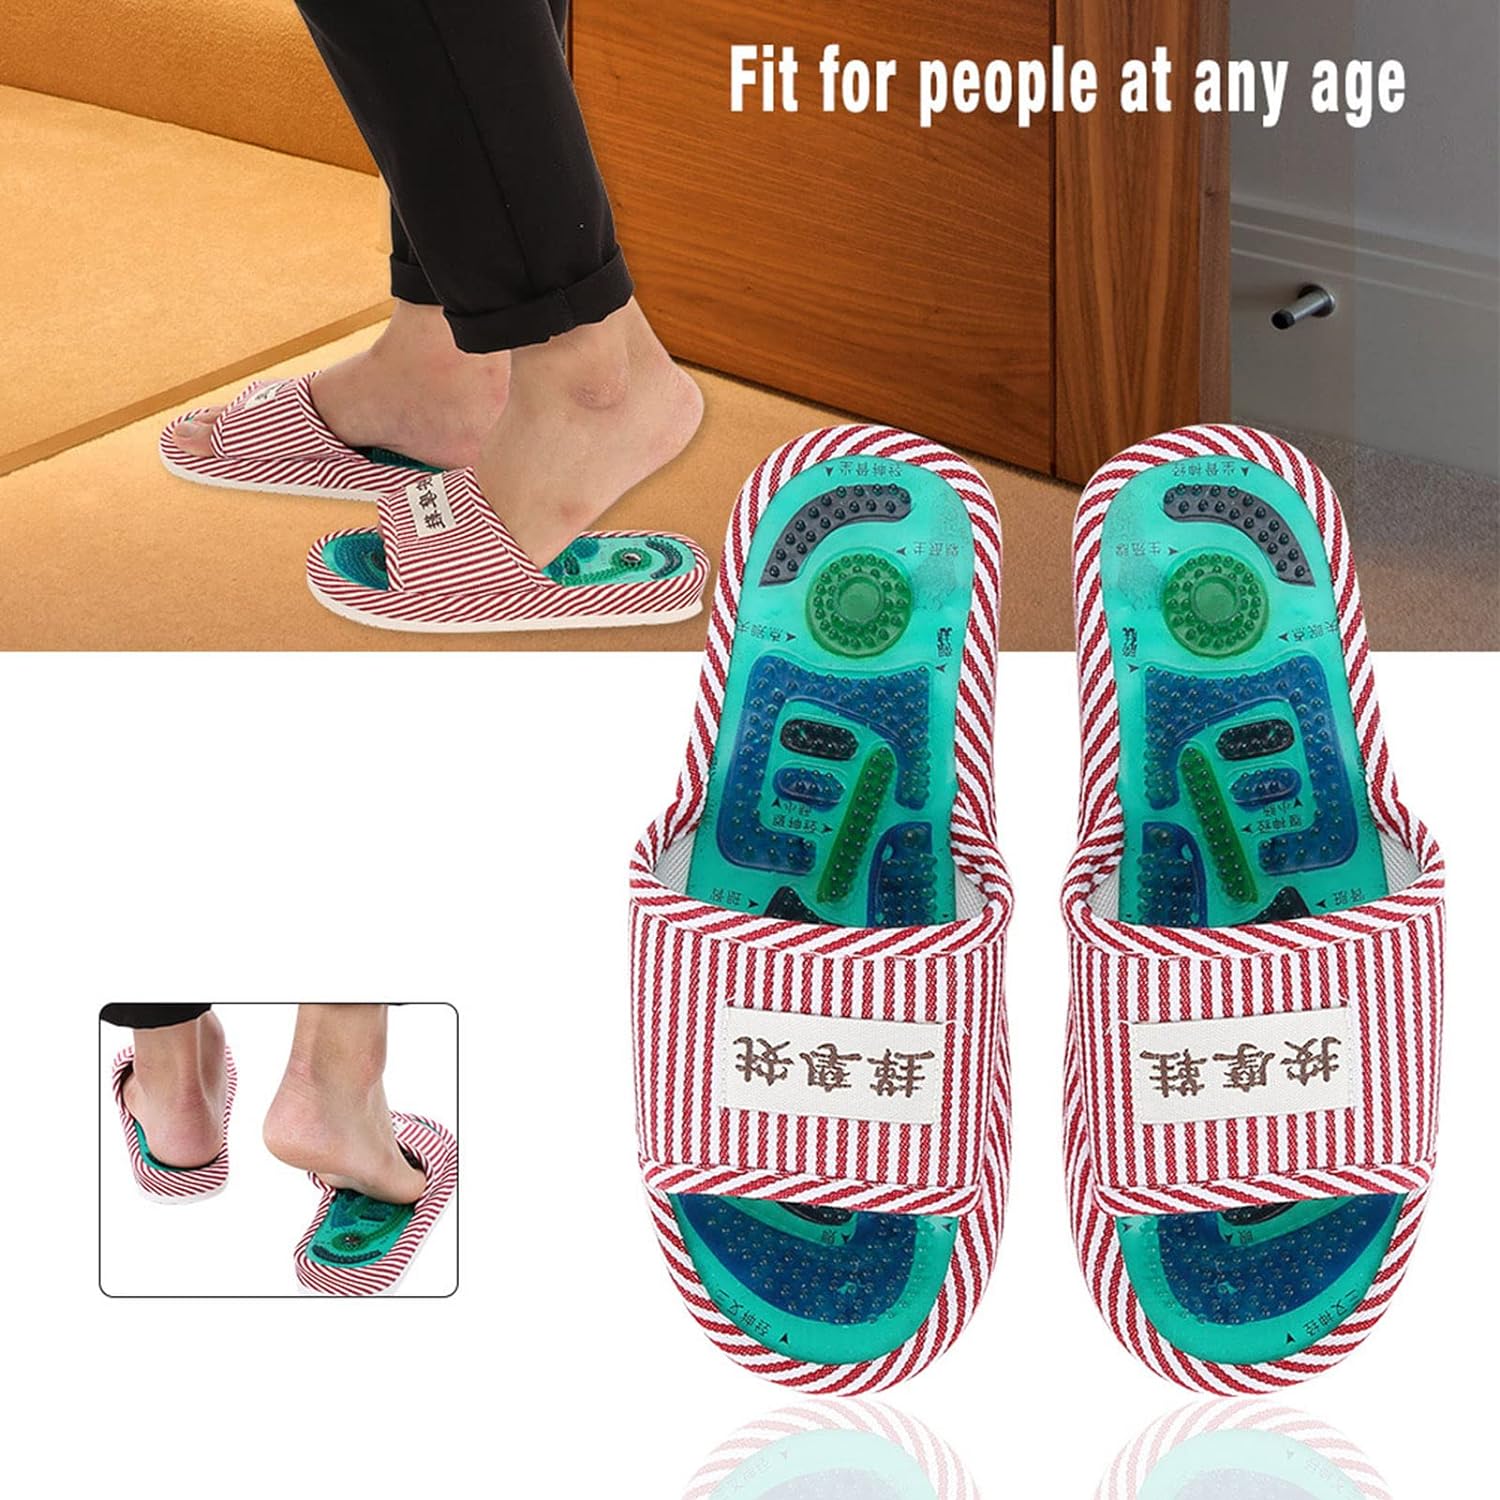 Acupressure Massage Slippers, Therapeutic Reflexology Sandals with Magnet Shoes for Foot Acupoint Massage, Shiatsu Arch Pain Relief, Healthy Feet Care(Women)